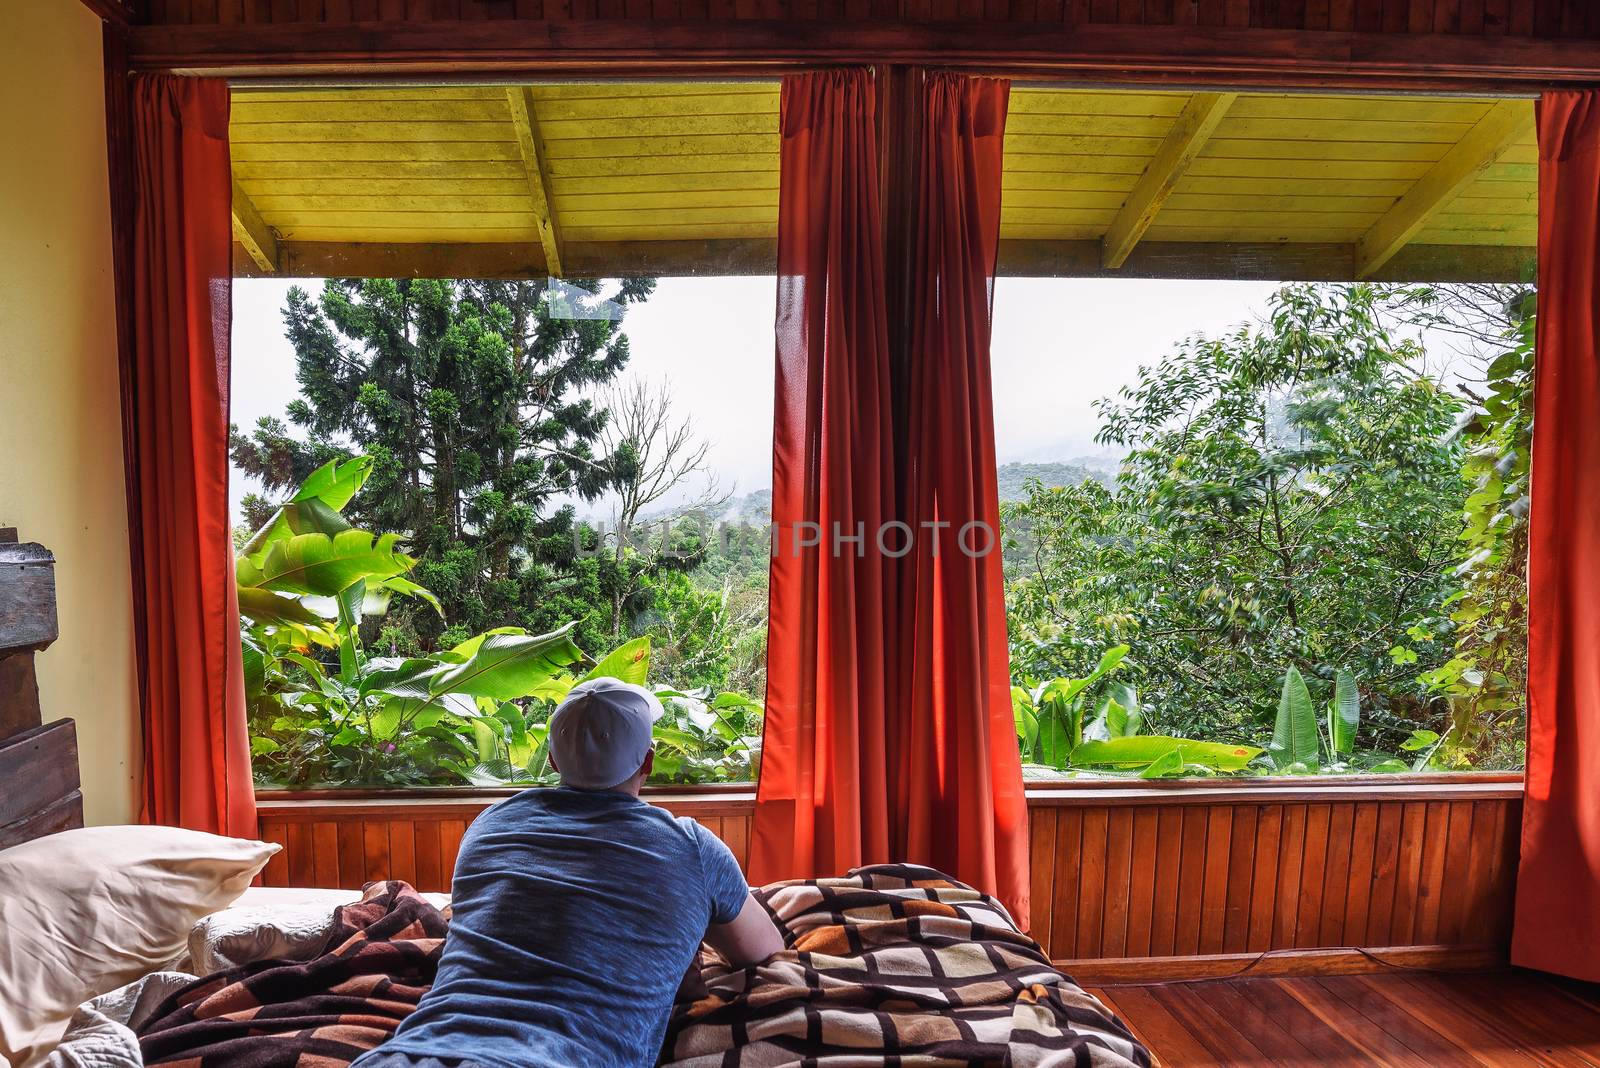 Tourist lying on a bed in Volcan Poas - Vara Blanca Tiquicia Lodge in Costa Rica by nickfox